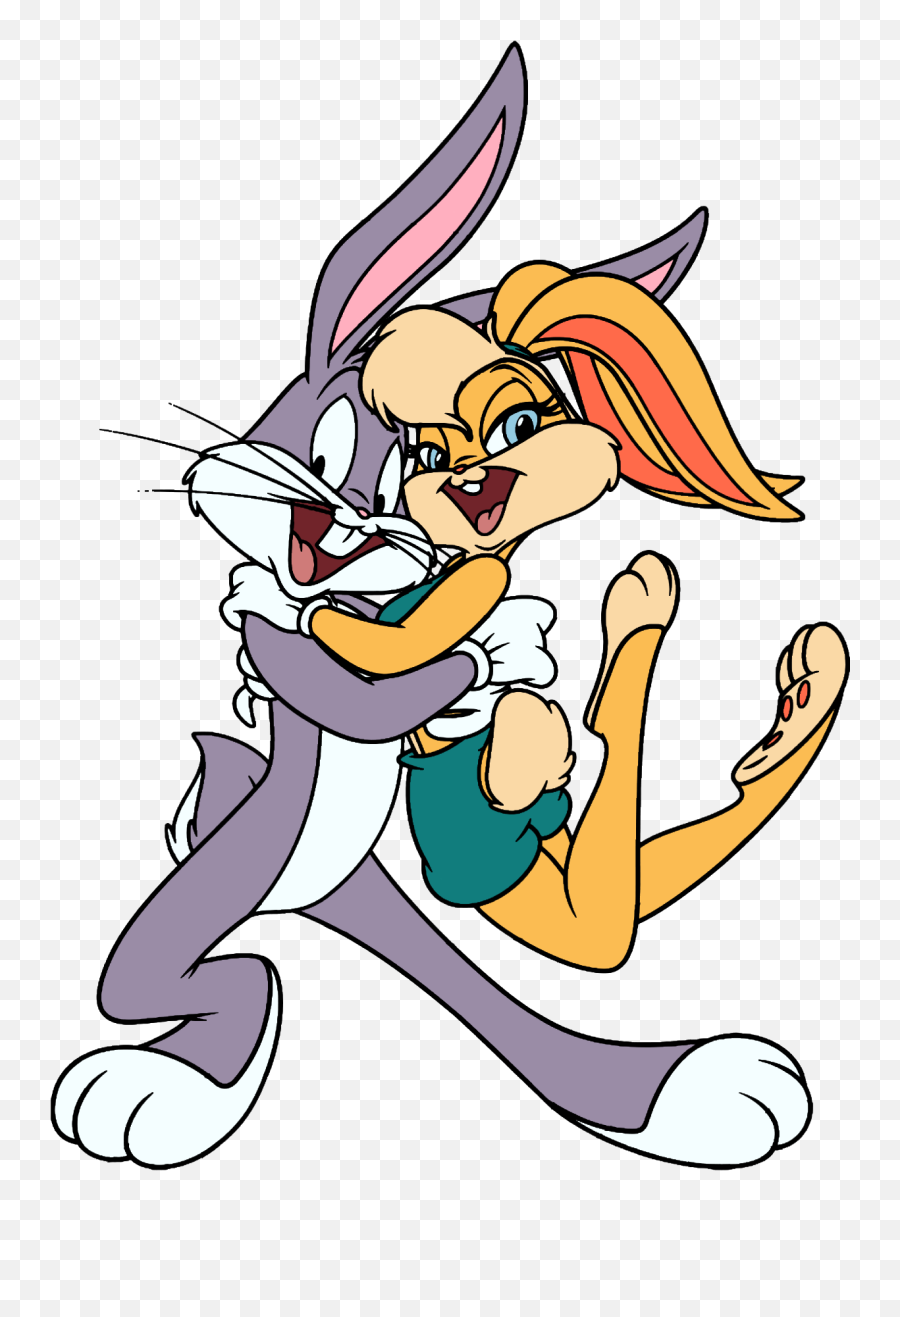 Bugs Bunny Christmas Clipart - Clipart Suggest Lola Bunny Y Bugs Bunny Png,Bugs Bunny Icon